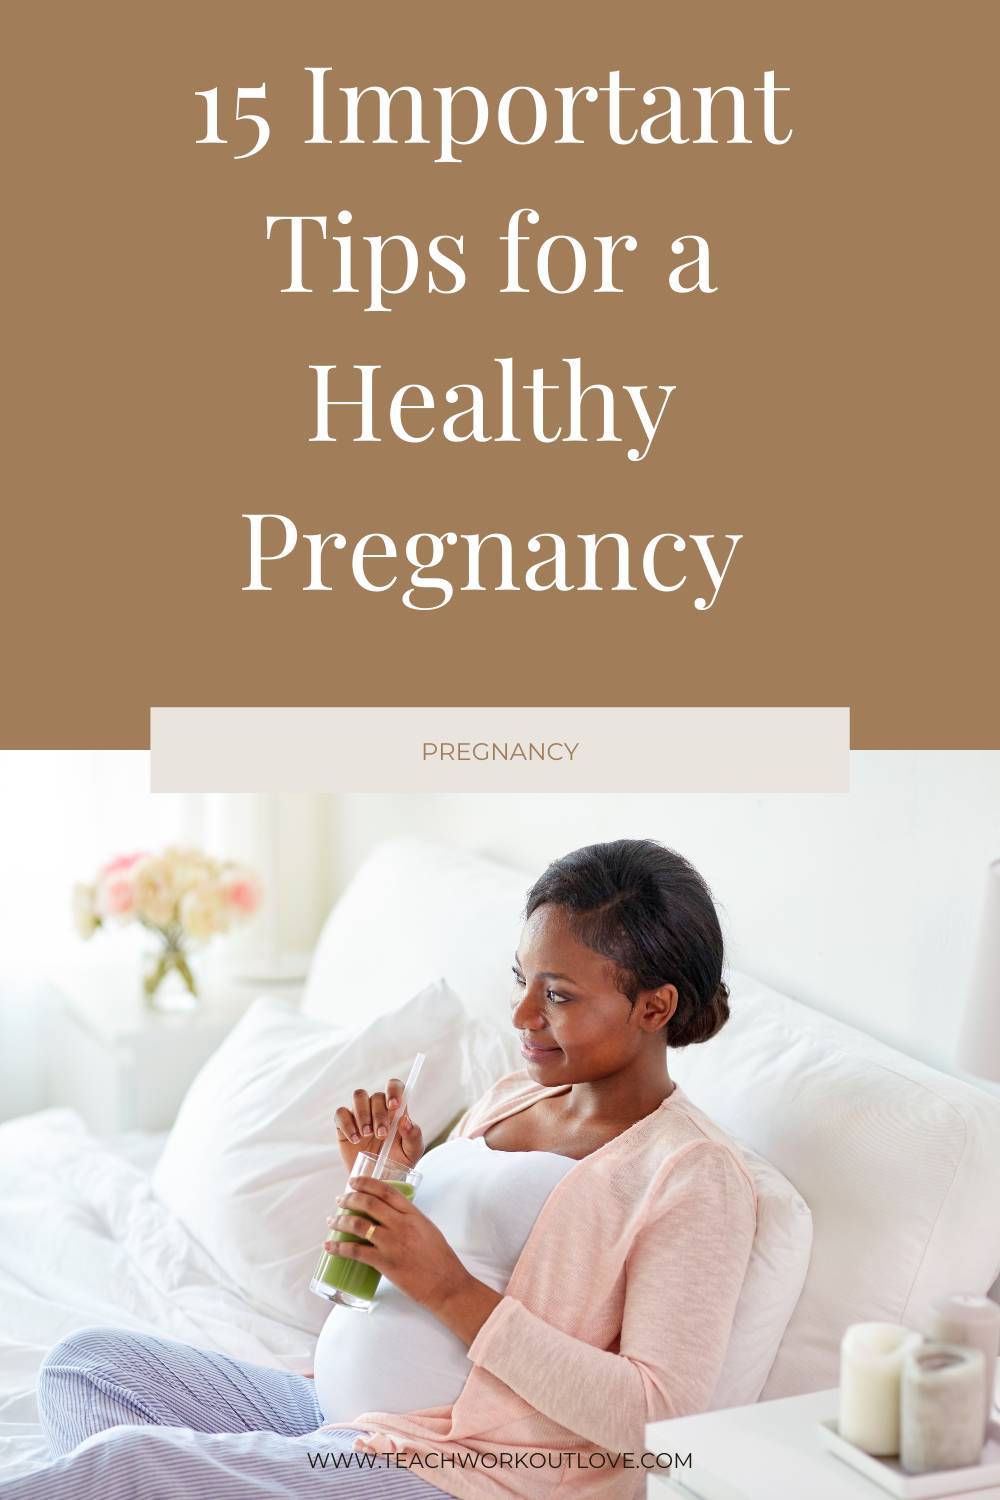 Want to feel your best during pregnancy? Here are the best tips for a healthy pregnancy to boost your energy and help that baby grow.